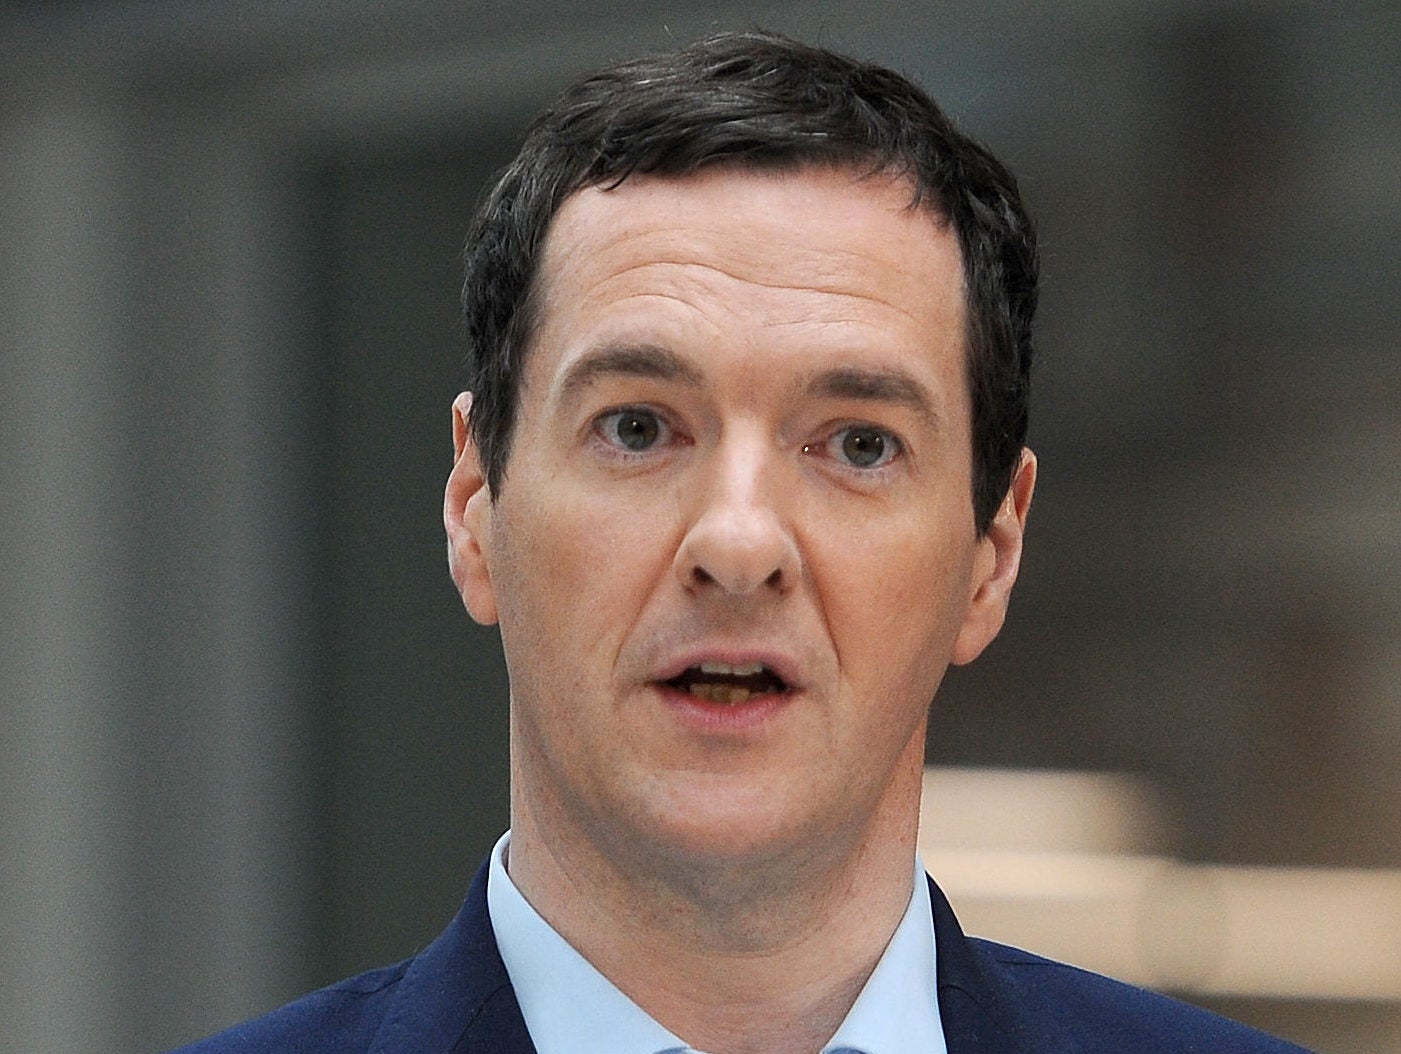 George Osborne stepping down as MP to focus on role as Evening Standard editor